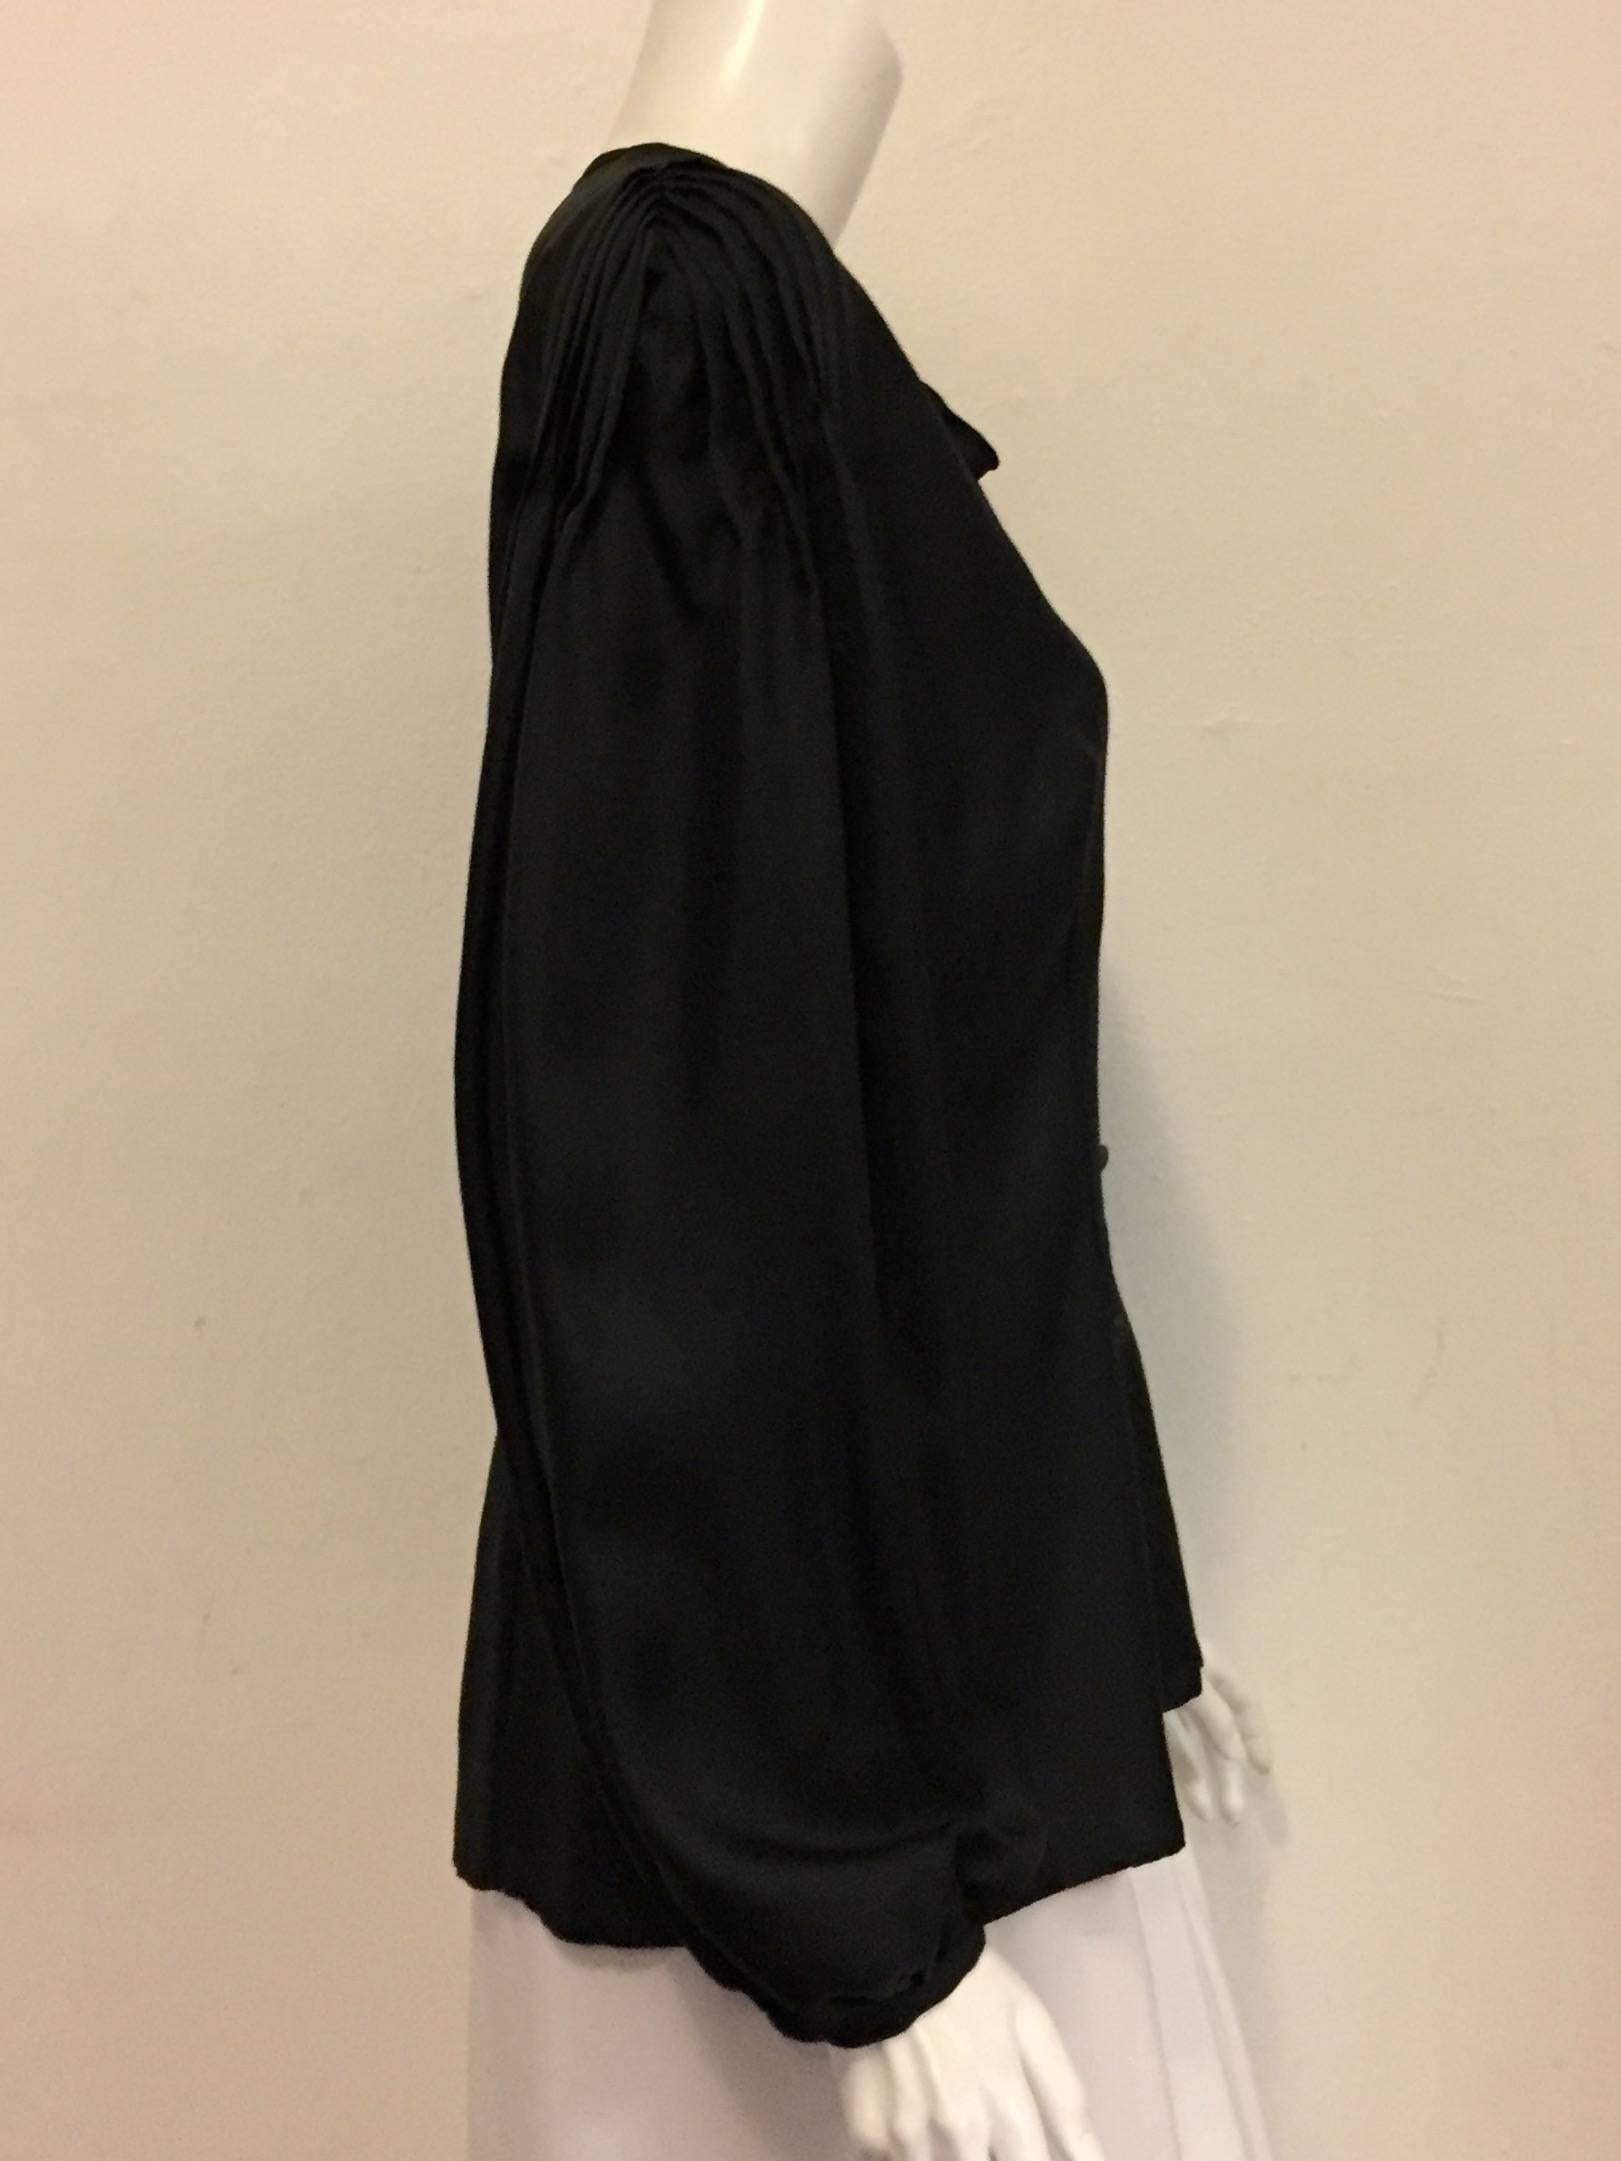 This Escada top can be characterized as the little black dress in a blouse.  Elegant and romantic, this blouse is perfect for day or night and a must for any woman's wardrobe!  Round collar with a ribbon that ties, peekaboo opening and 5 buttons